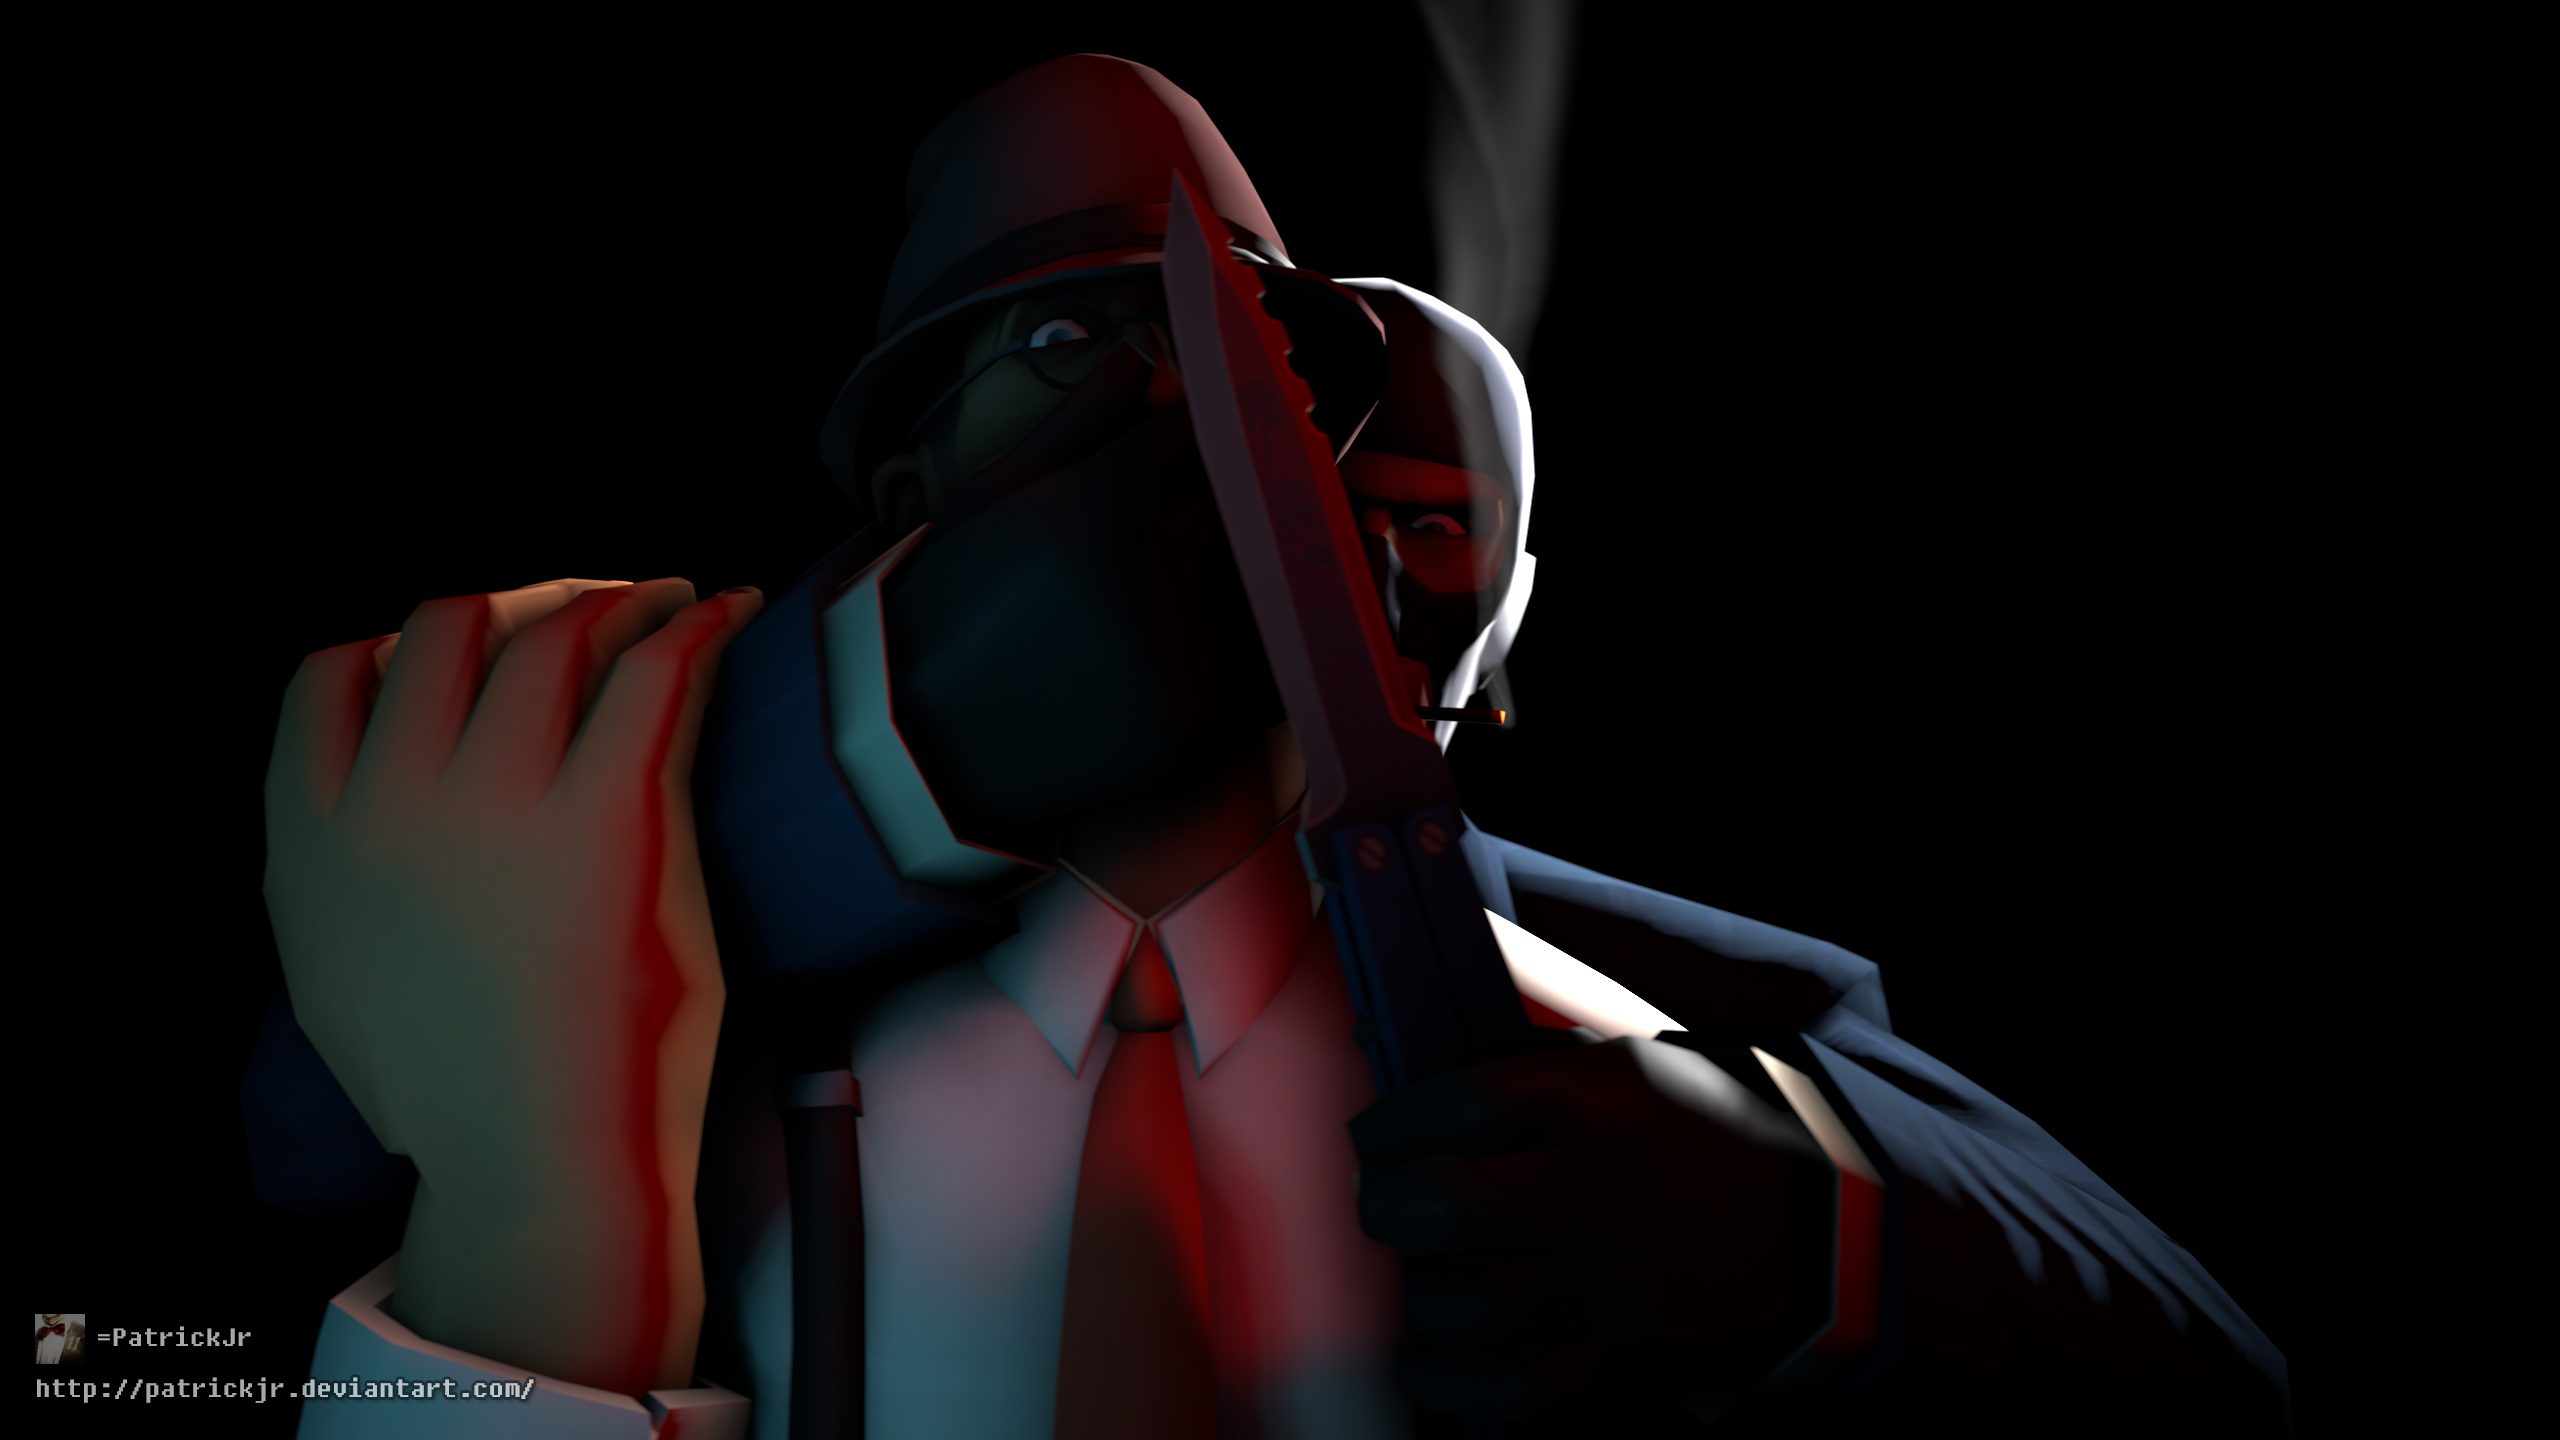 Tf2 Spy Wallpaper Sfm Poster About To Kill